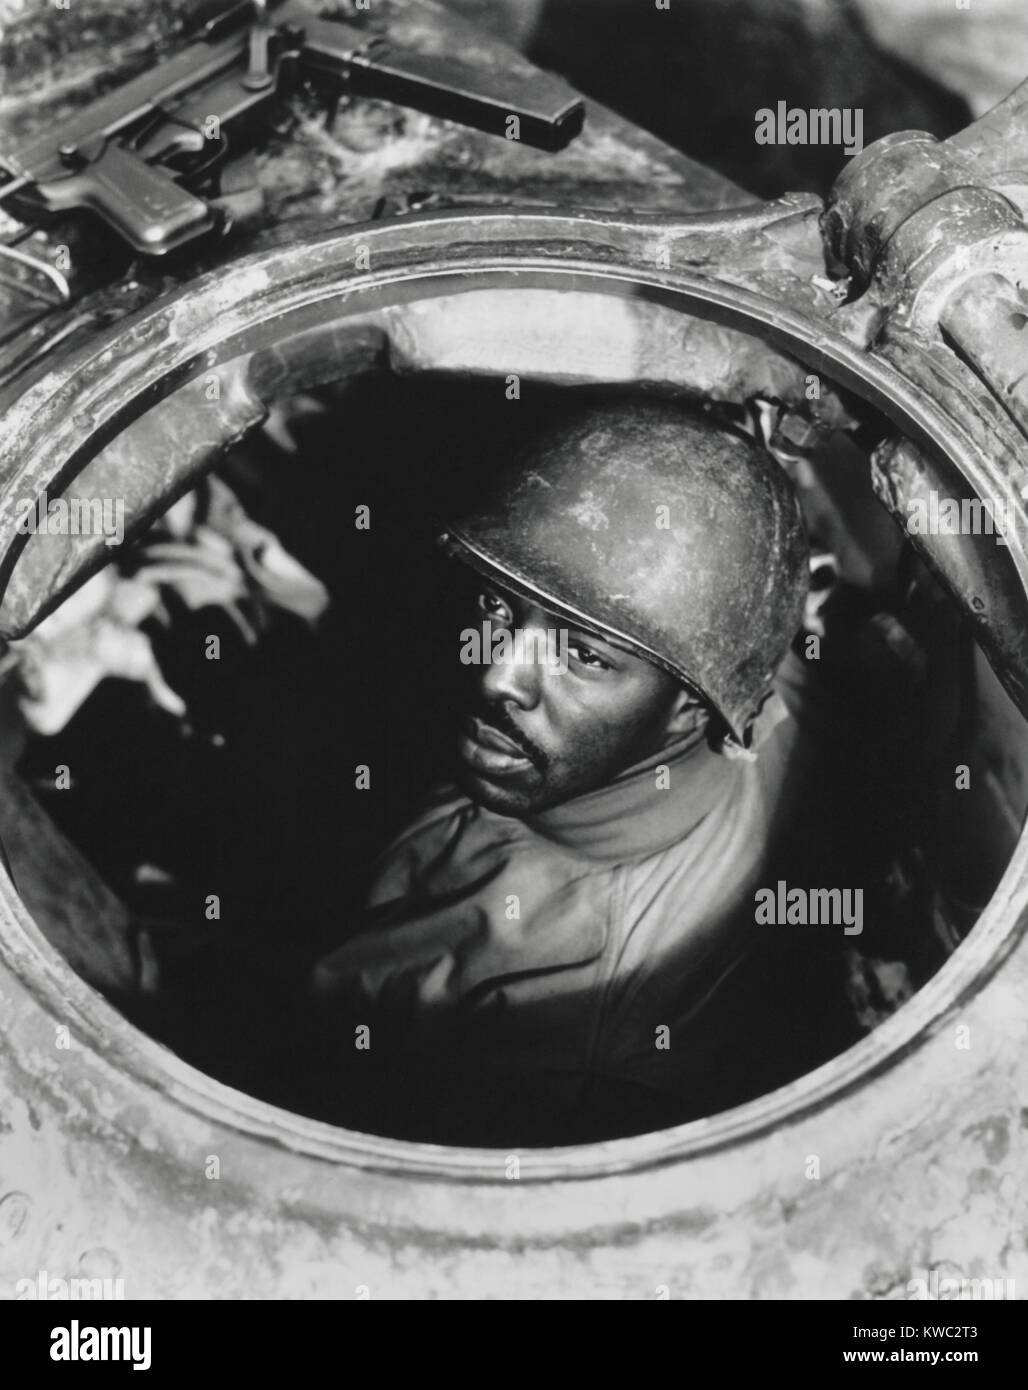 African American soldier in the turret of an armored vehicle during World War 2. Unknown date or location. (BSLOC 2015 13 102) Stock Photo